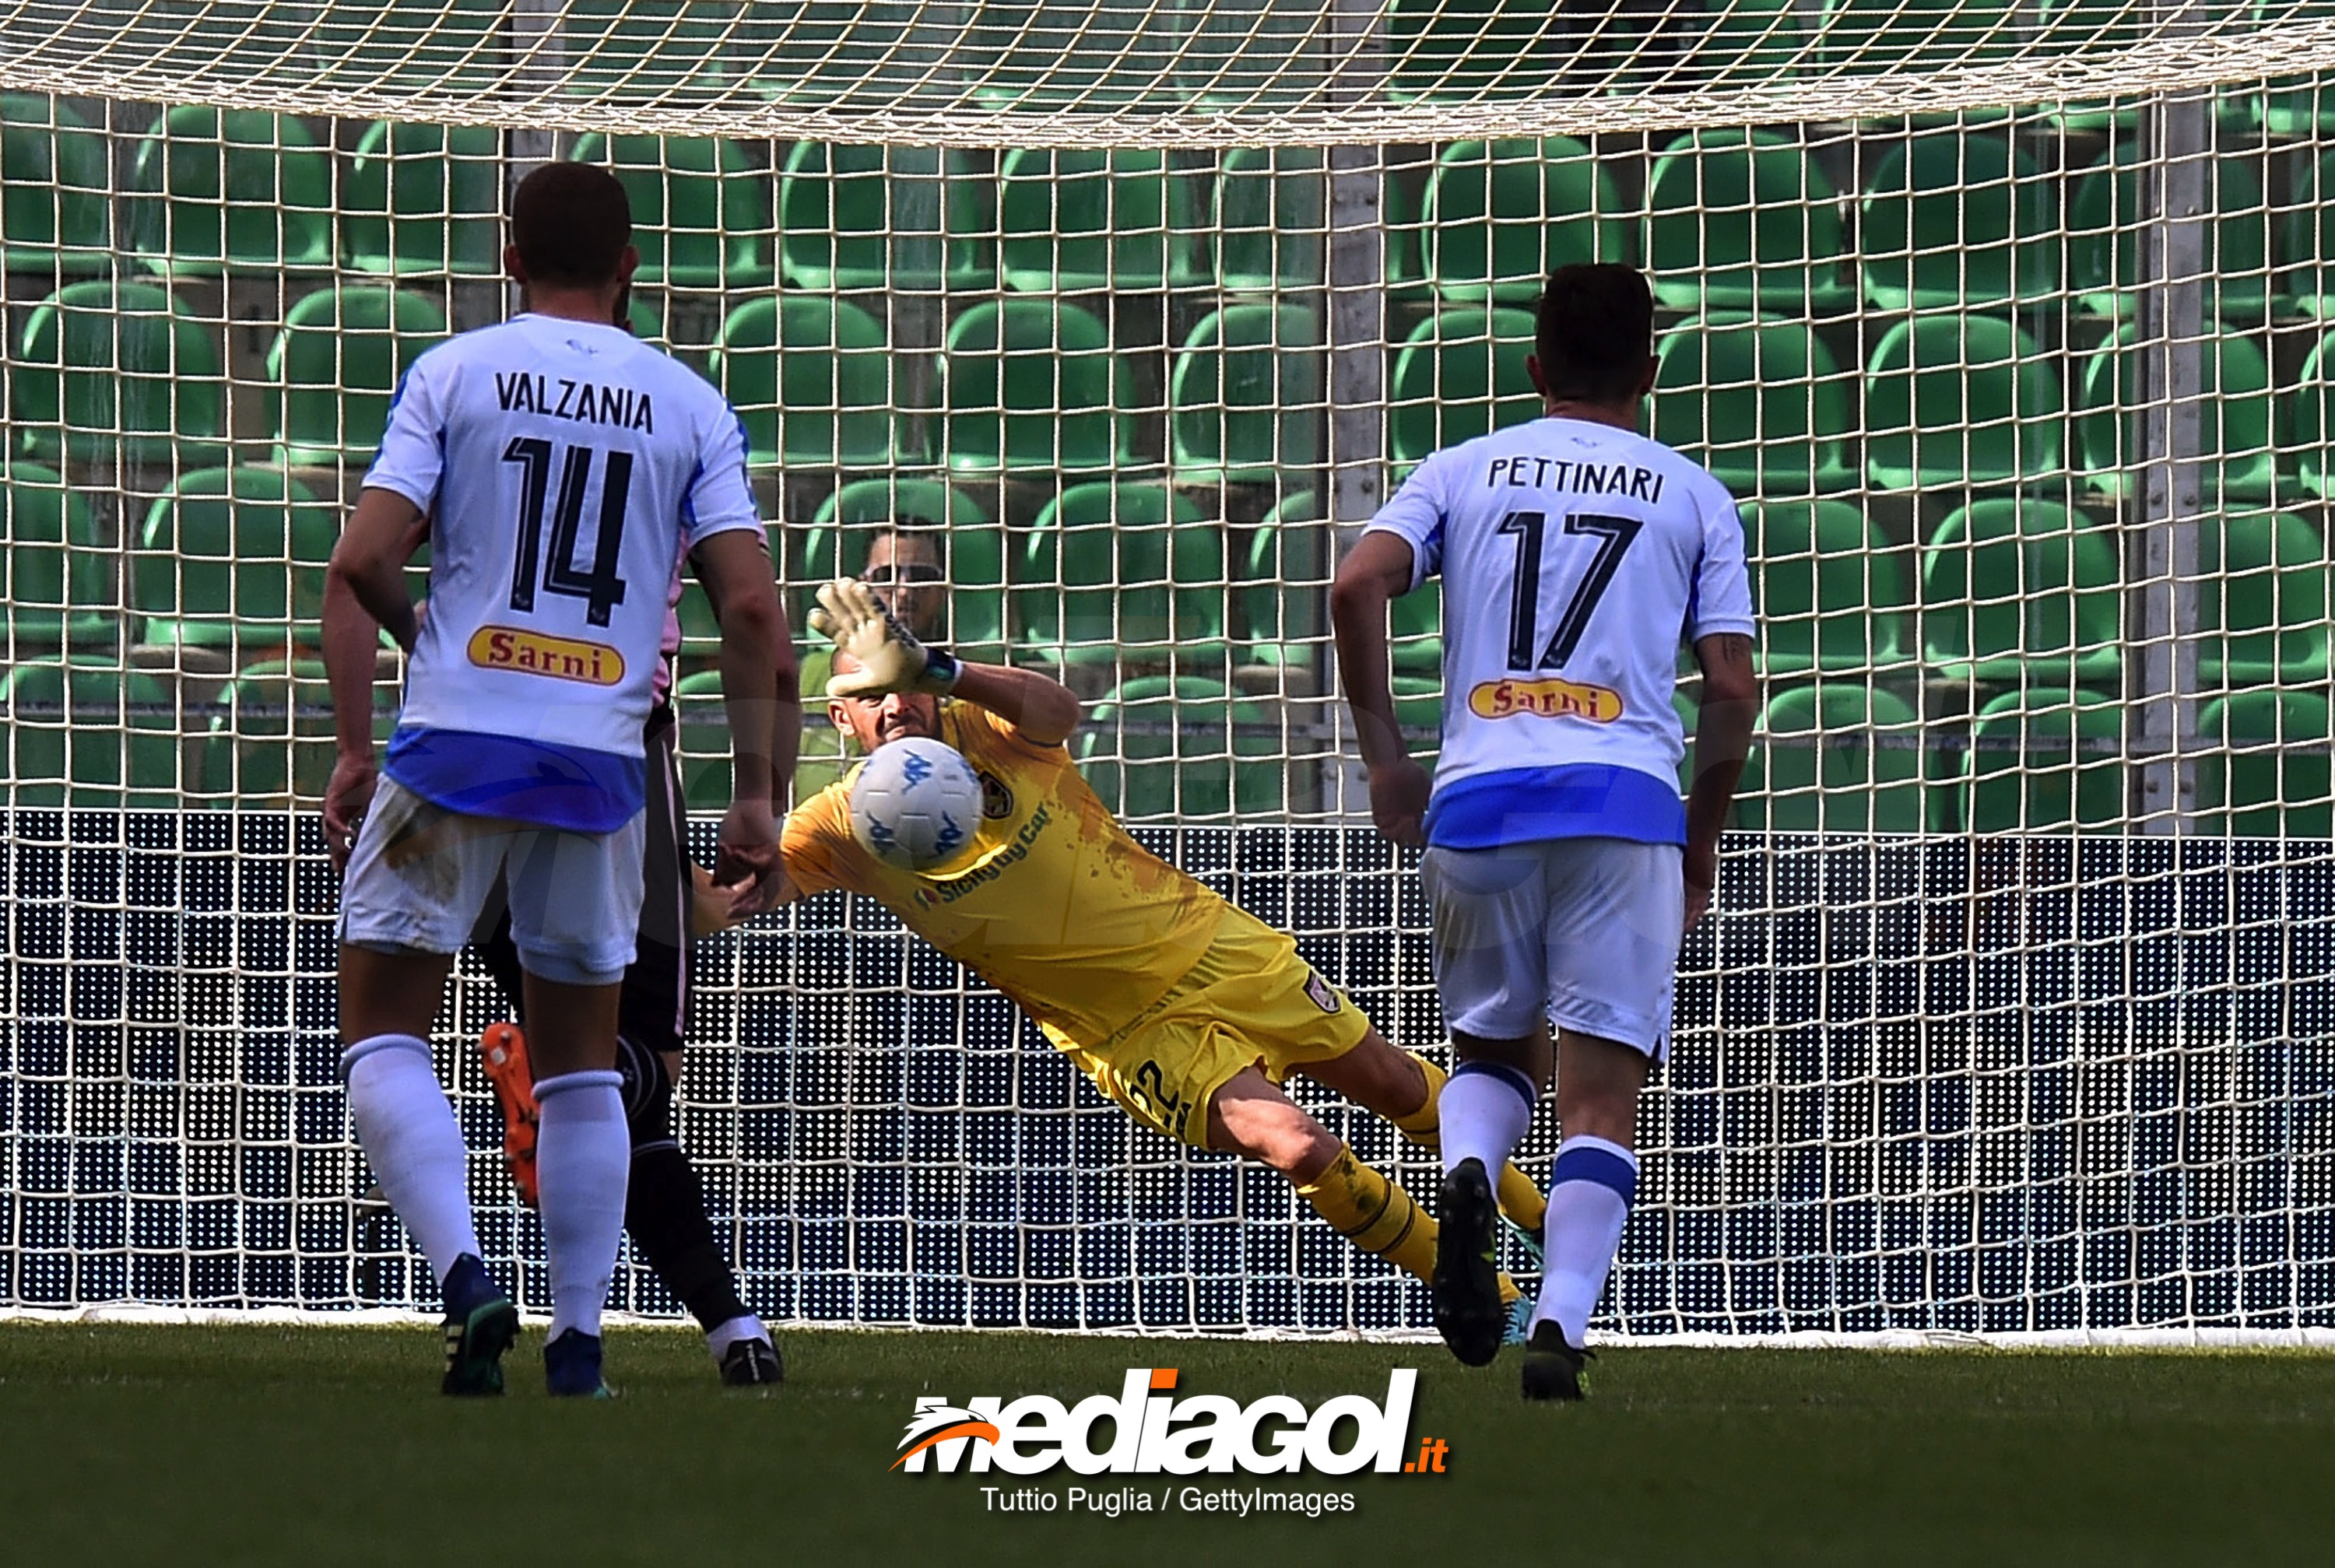 PALERMO, ITALY - APRIL 07: Alberto Pomini goalkeeper of Palermo saves a penalty during the serie A match between US Citta di Palermo and Pescara Calcio at Stadio Renzo Barbera on April 7, 2018 in Palermo, Italy.  (Photo by Tullio M. Puglia/Getty Images)